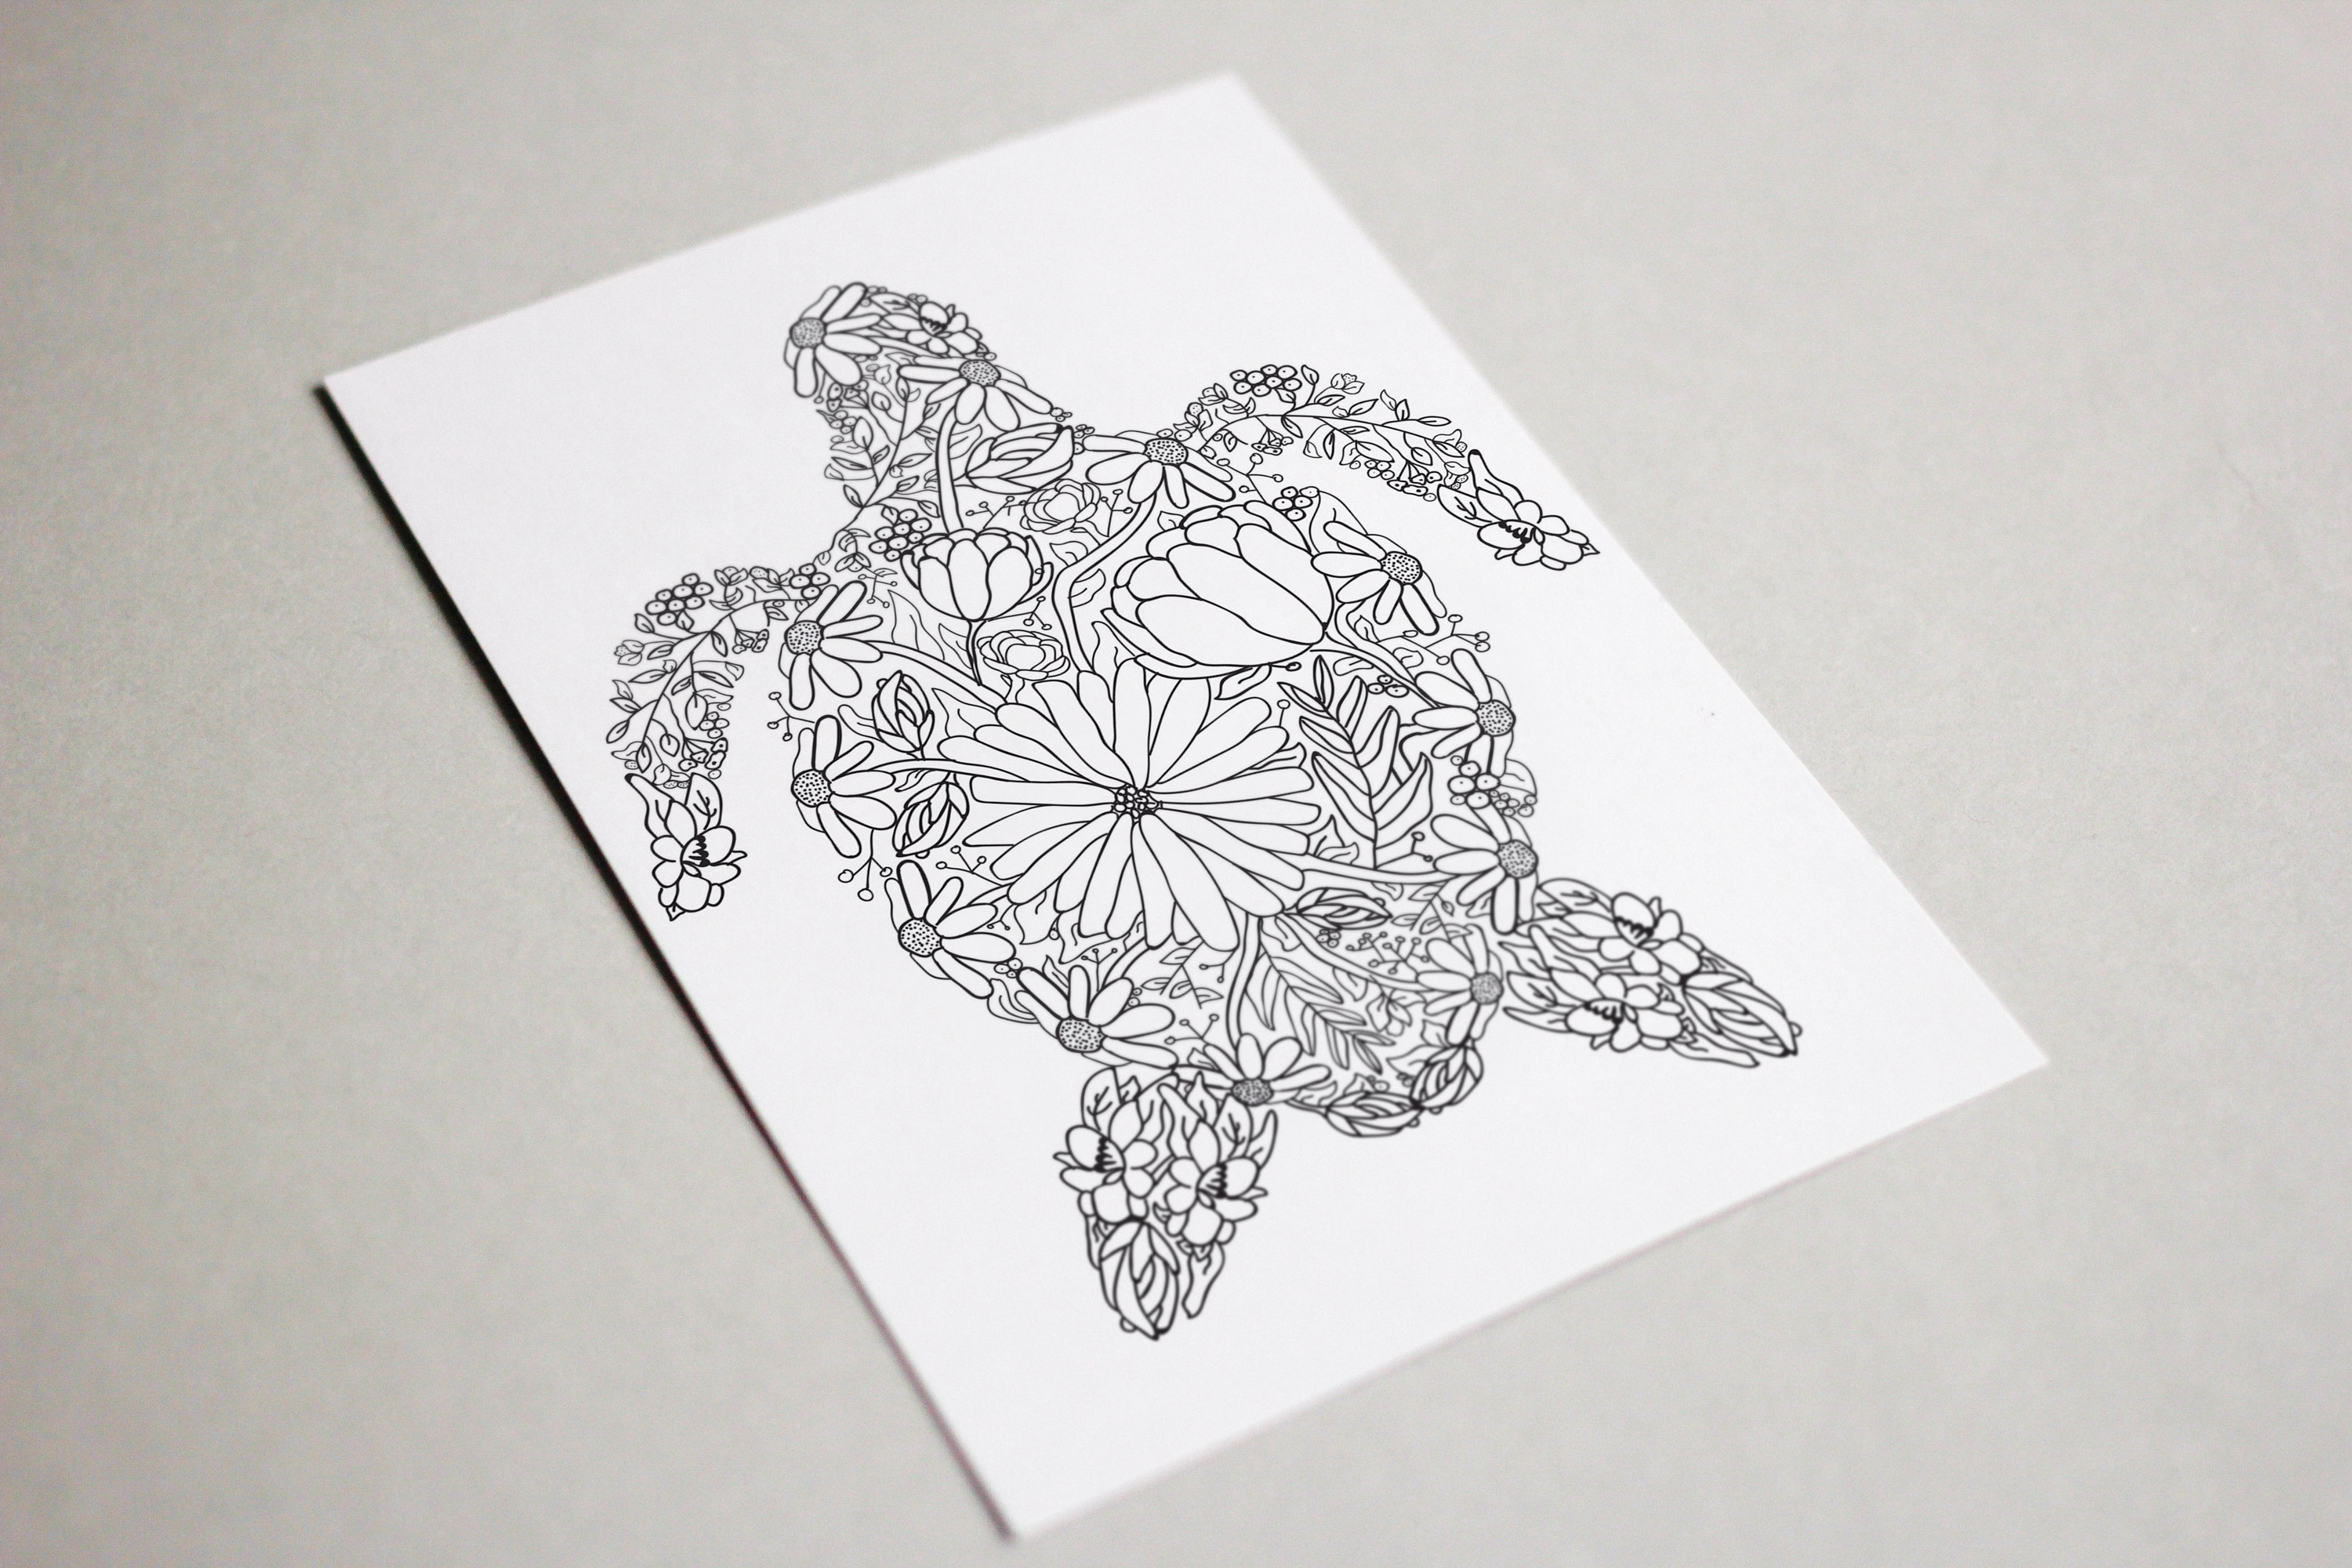 A turtley awesome line drawing of a turtle from flowers